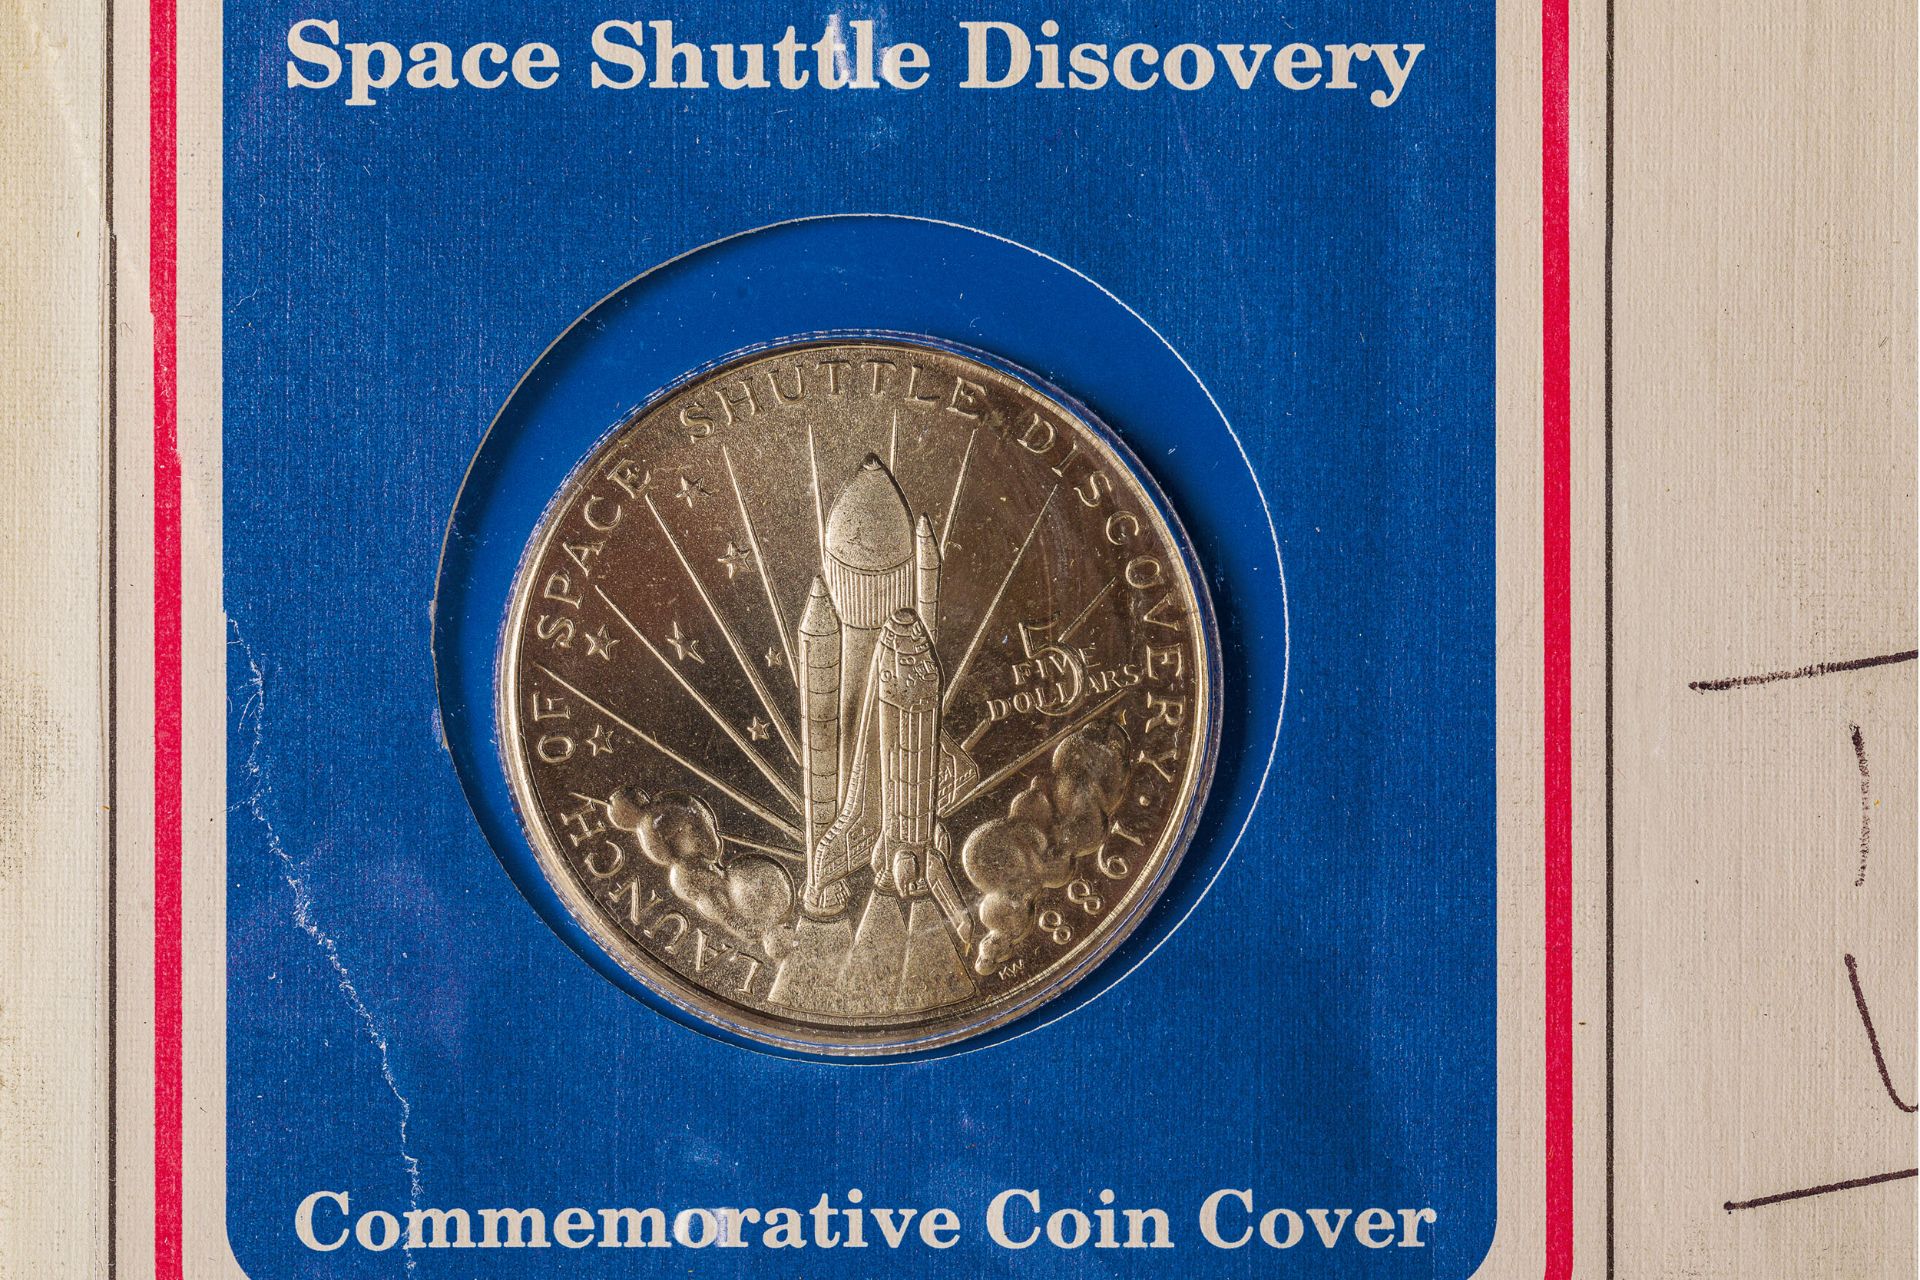 SPACE SHUTTLE DISCOVERY COMMEMORATIVE COIN COVER, KENNEDY SPACE CENTER, 1988 - Image 2 of 5